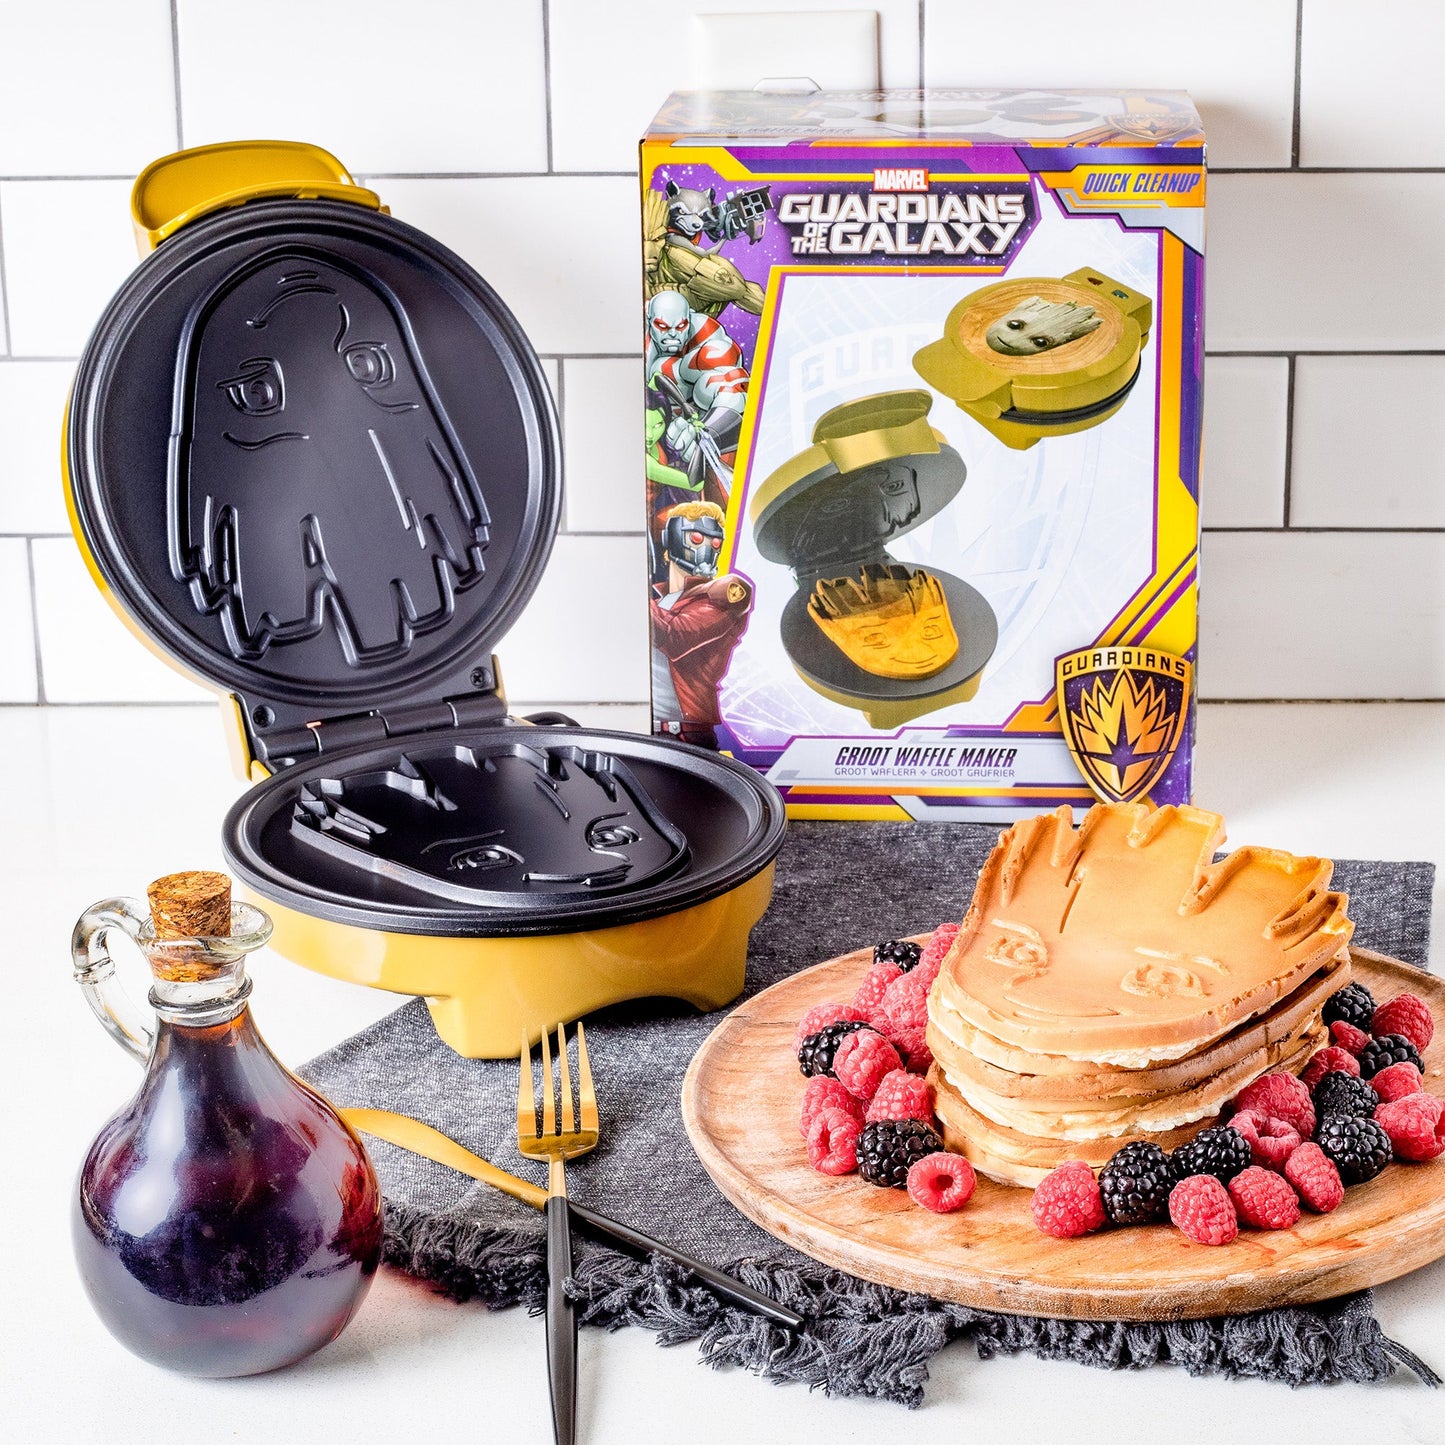 https://cdn.shopify.com/s/files/1/0409/4971/1001/products/marvel-groot-guardians-of-the-galaxy-I-am-groot-baby-groot-waffle-maker_1445x.jpg?v=1645310663